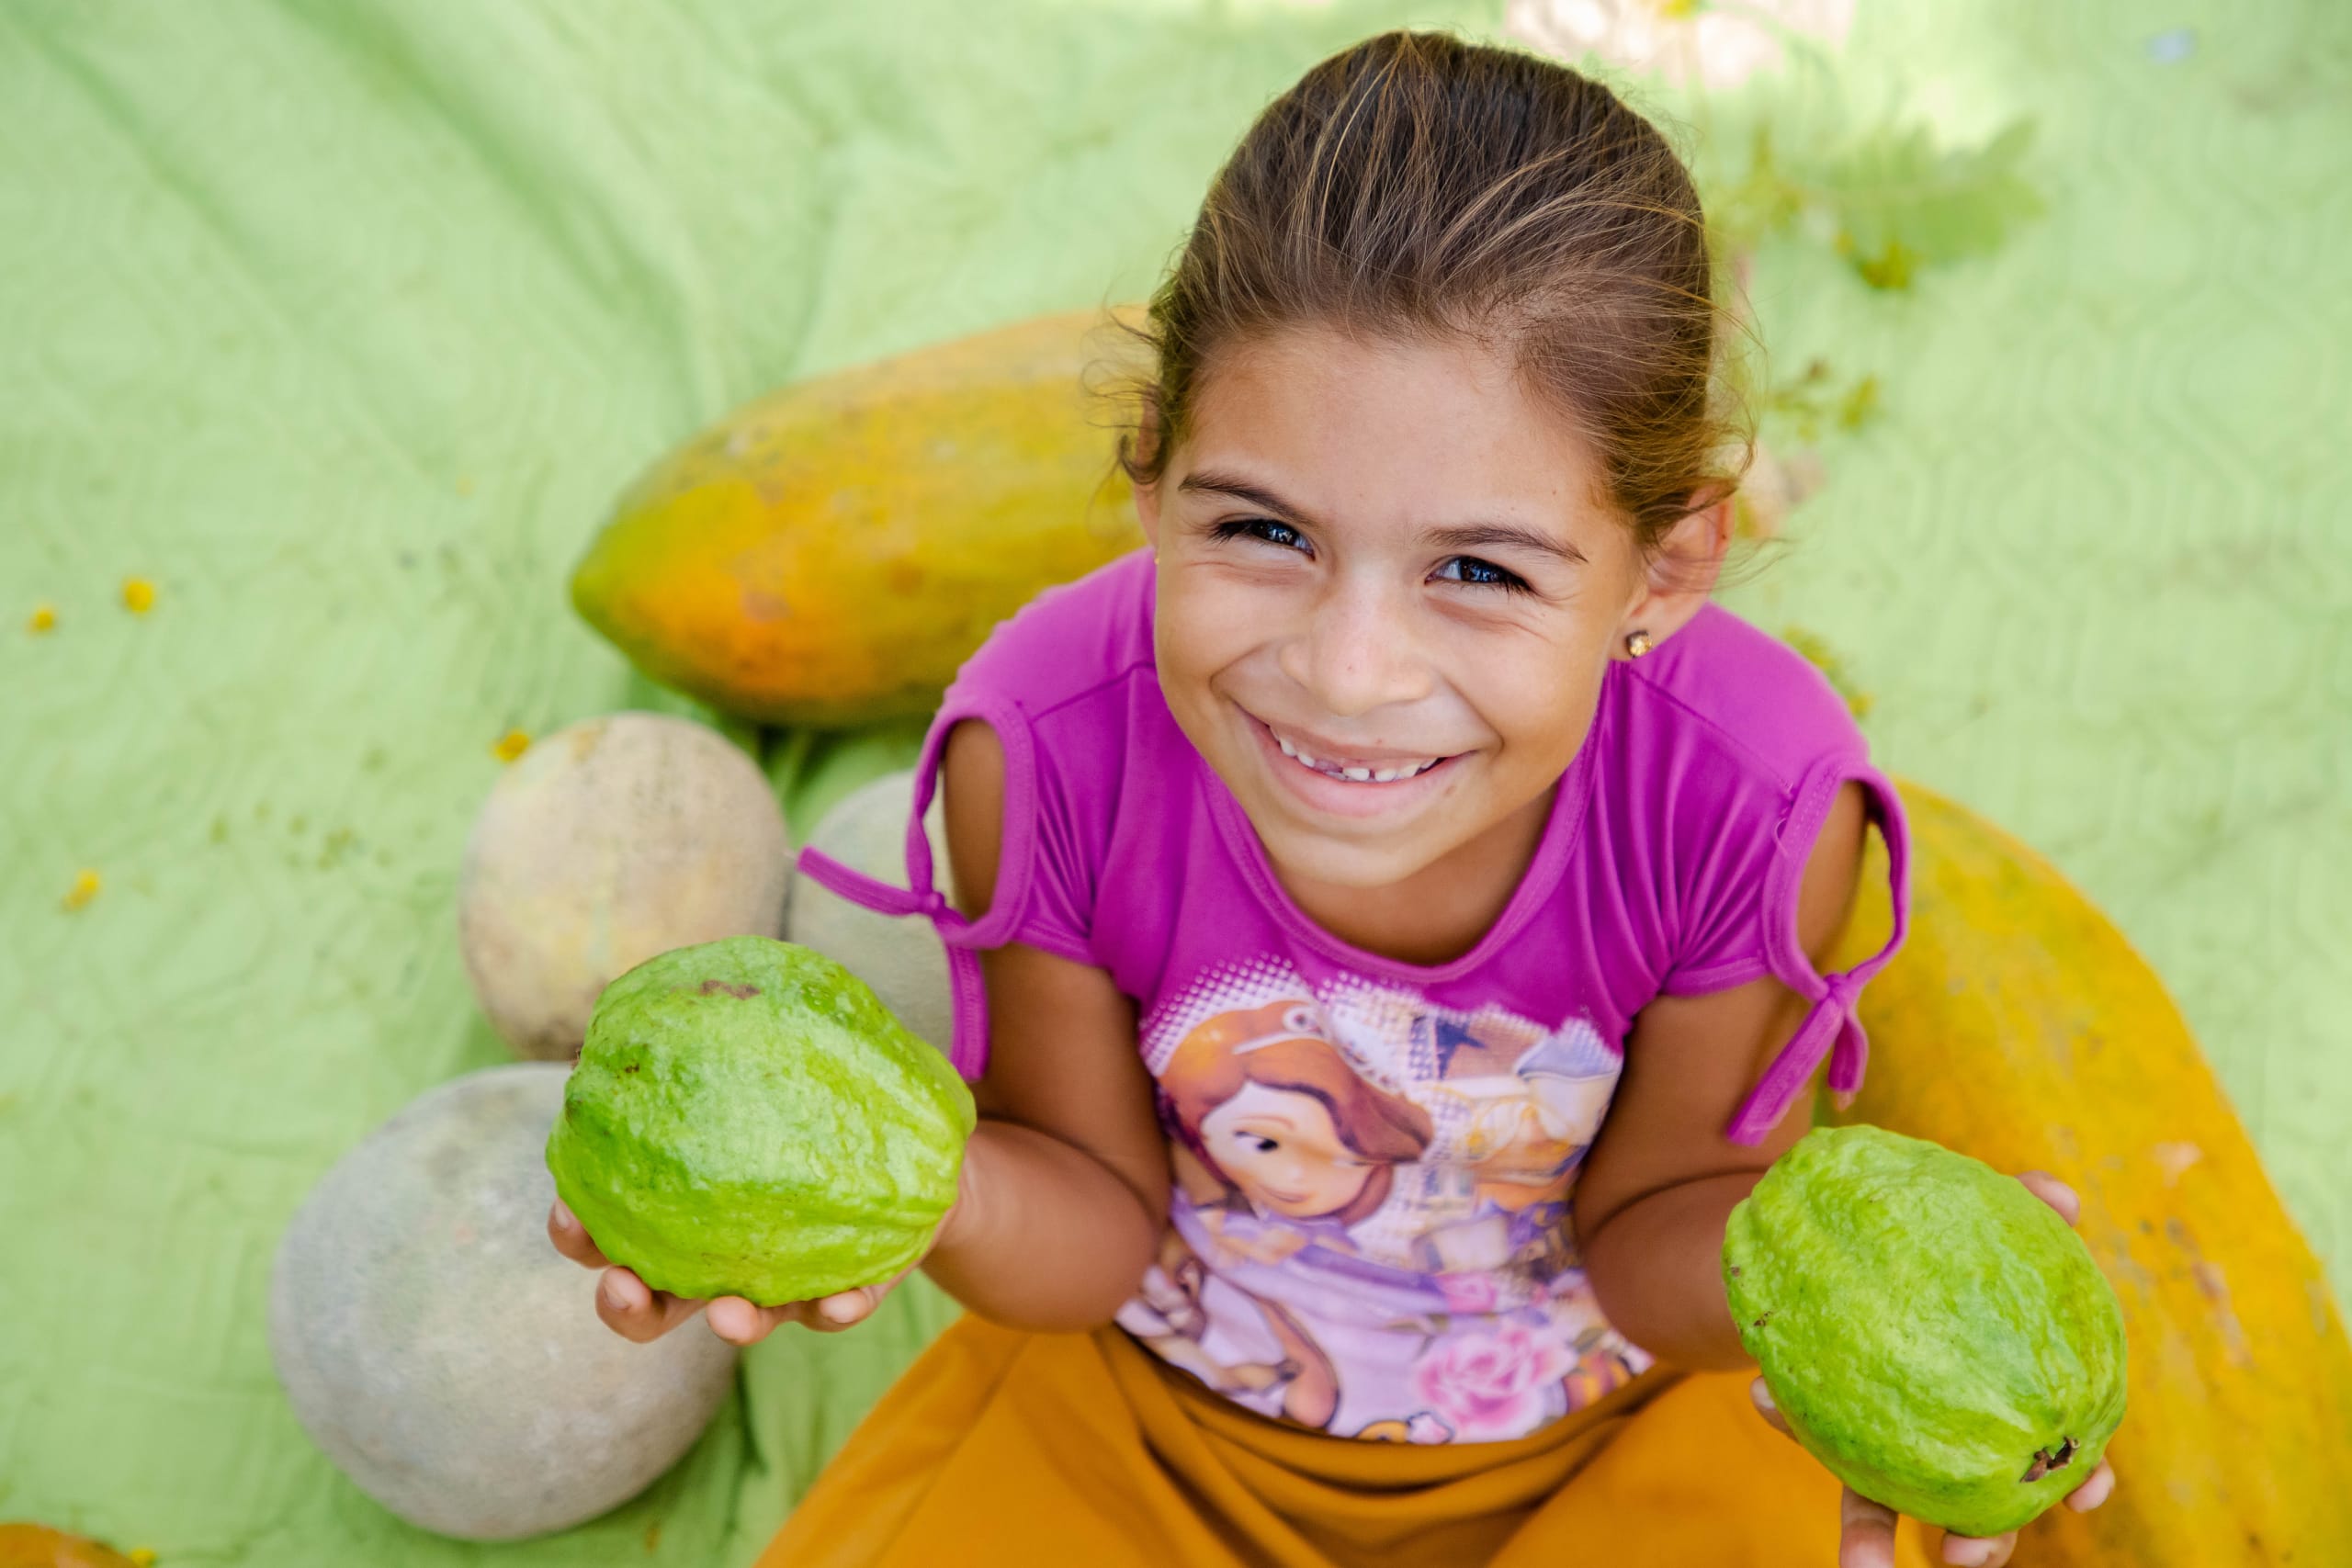 Girls wears a pink shirt and holds vegetables in her hands.